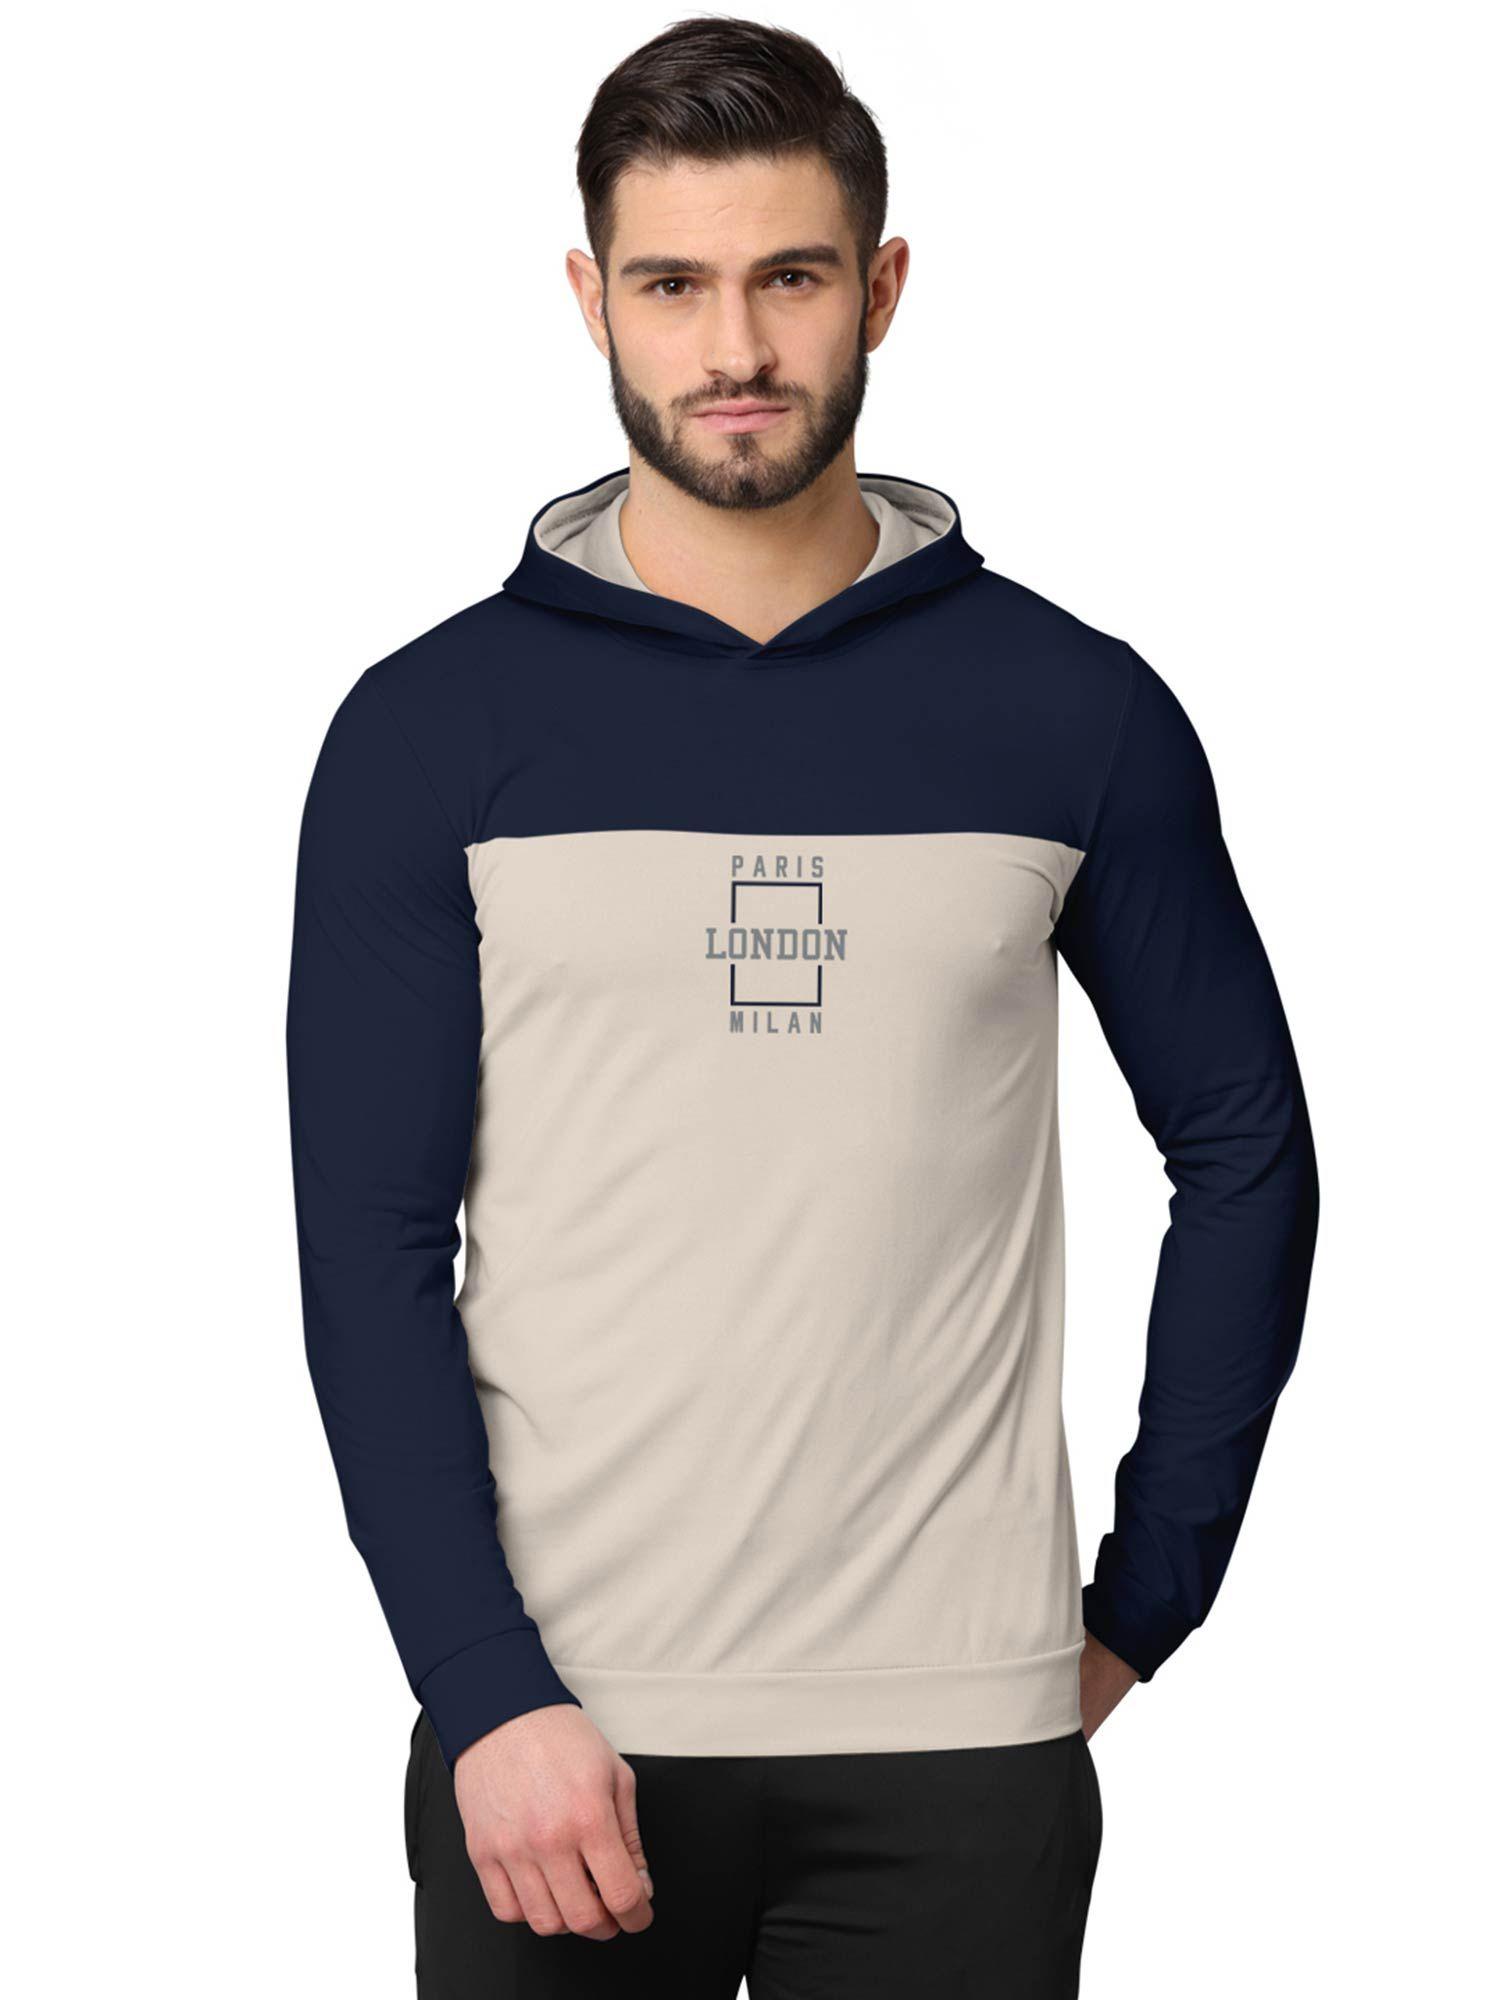 colorblock-full-sleeve-hooded-sweatshirts-for-men-navy-blue-and-beige